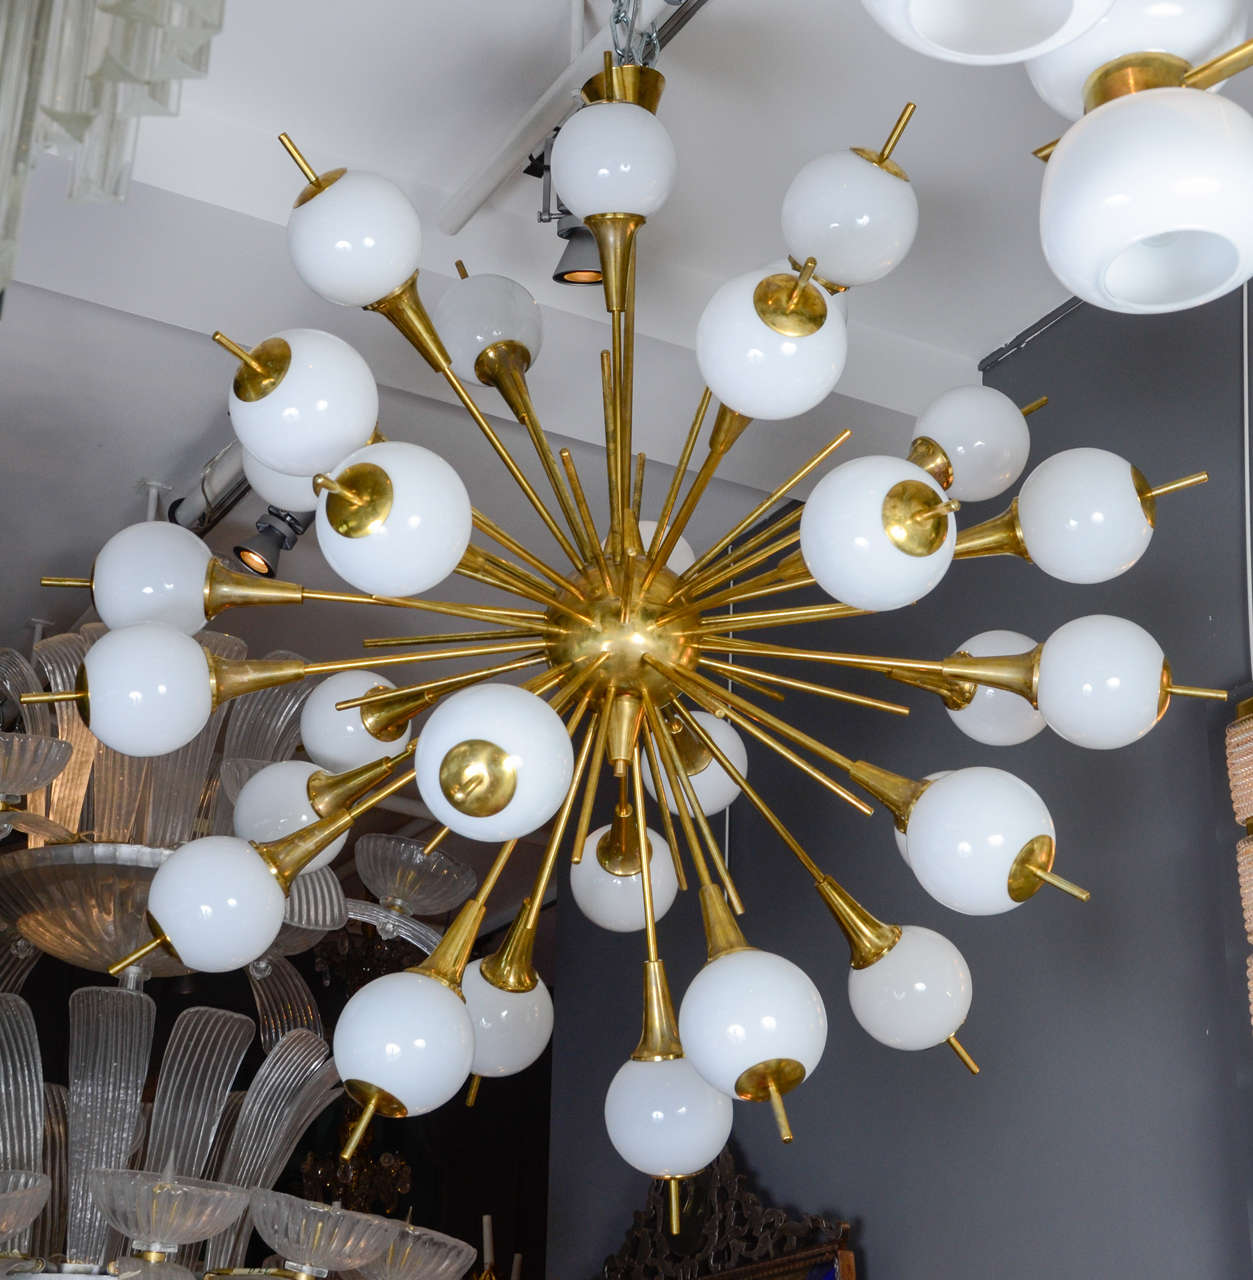 Impressive chandelier, sputnik style, made of shiny rods and arms ended by a white glass globe containing the light. Each globe is also finished with brass.
Perfect condition, new electrification, thirty arms of light.